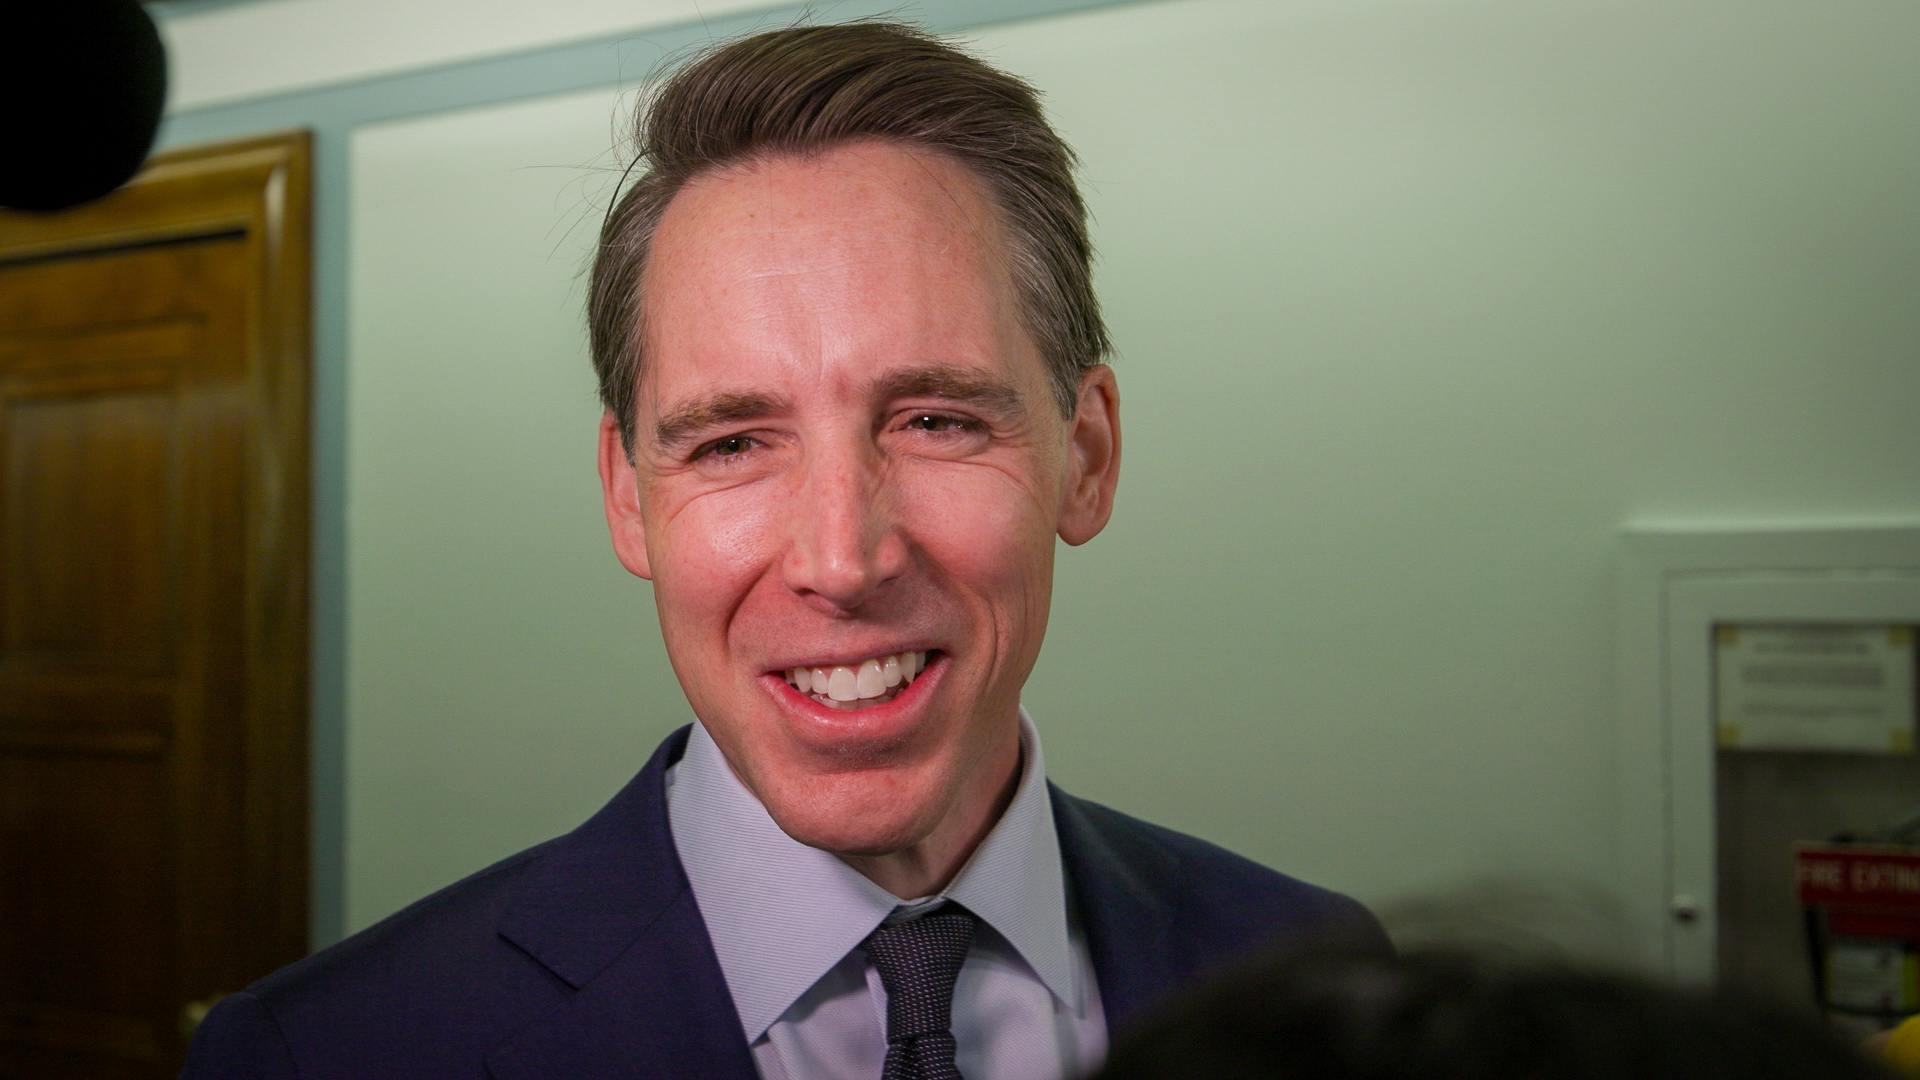 Sen. Josh Hawley, R-Mo., said "no" when asked if he's interested in being a vice presidential candidate in 2024.